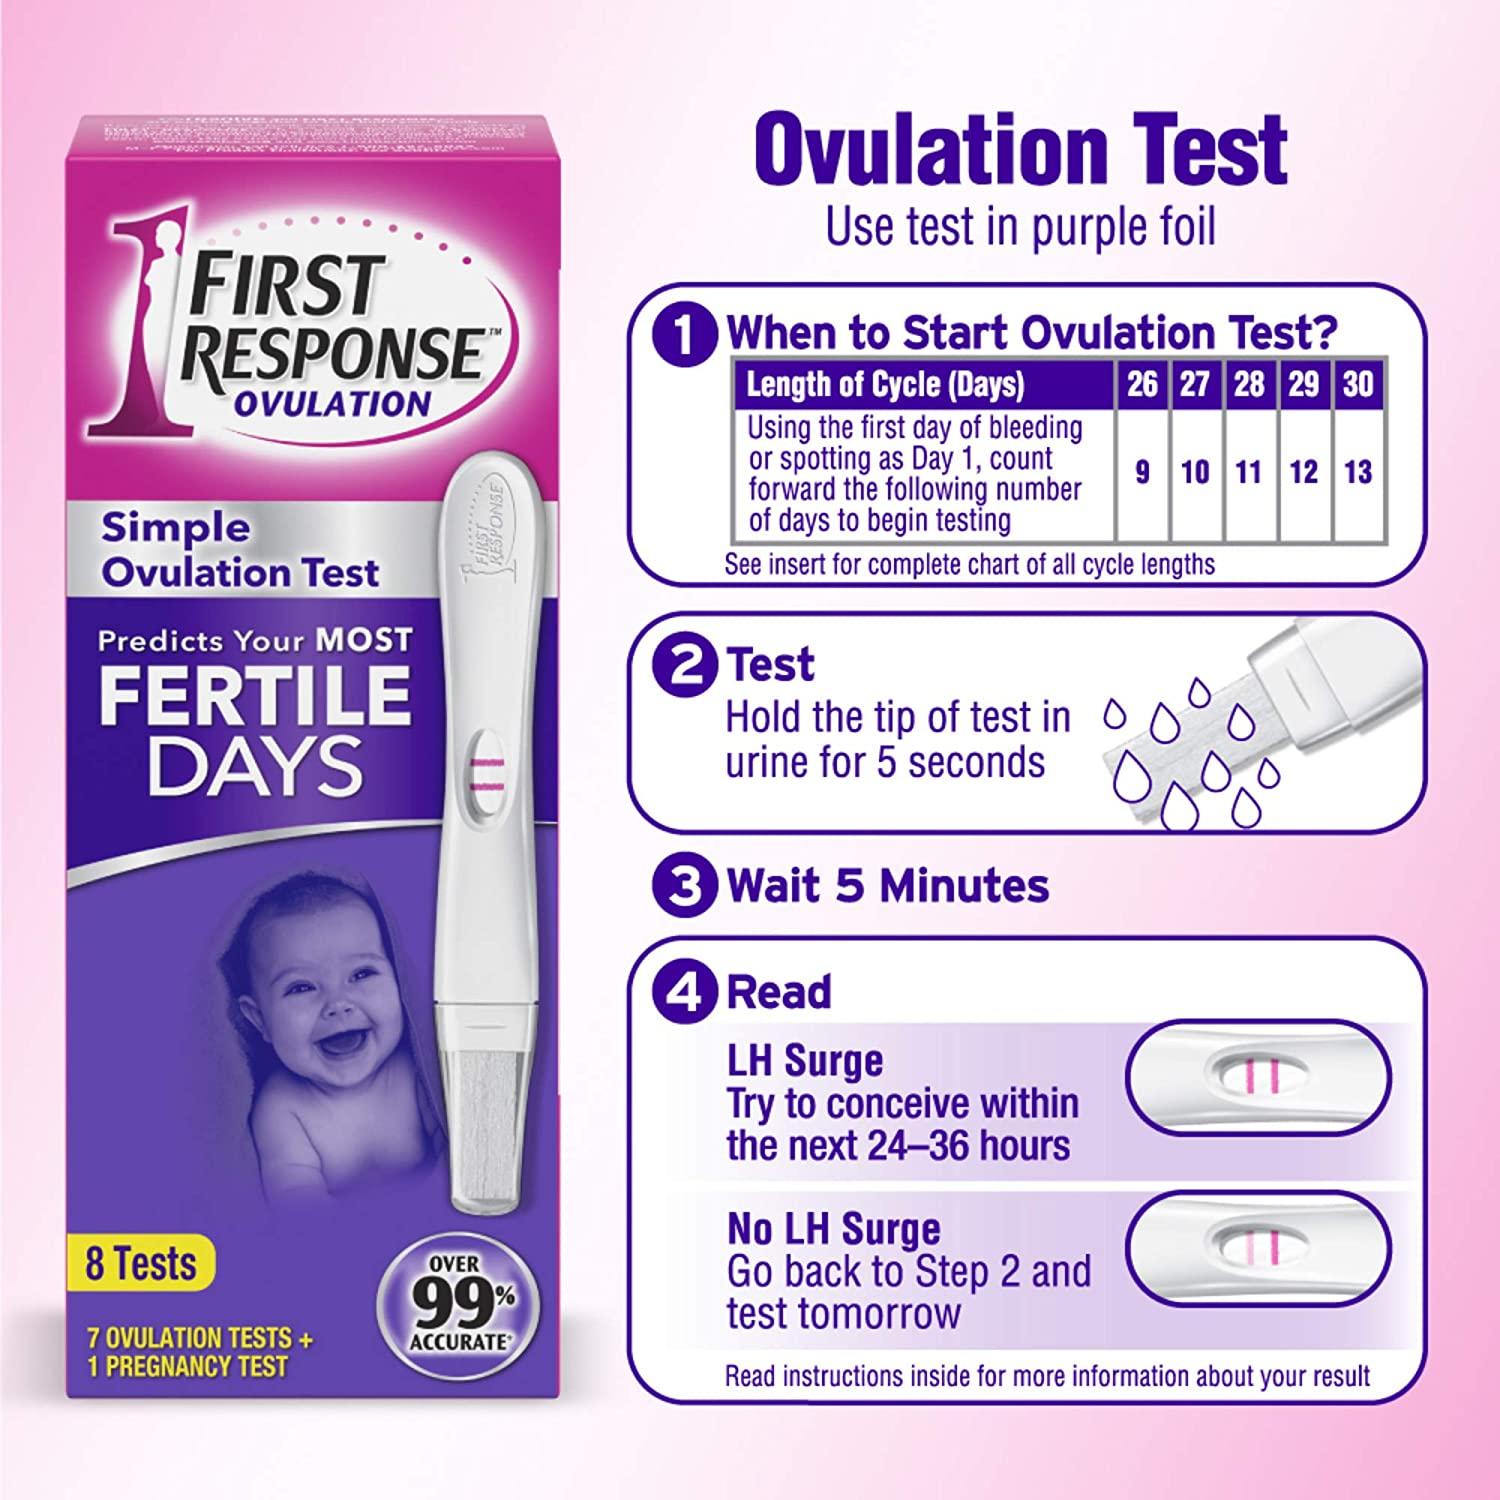 First Response Ovulation And Pregnancy Test Kit 7 Ovulation Tests + 1